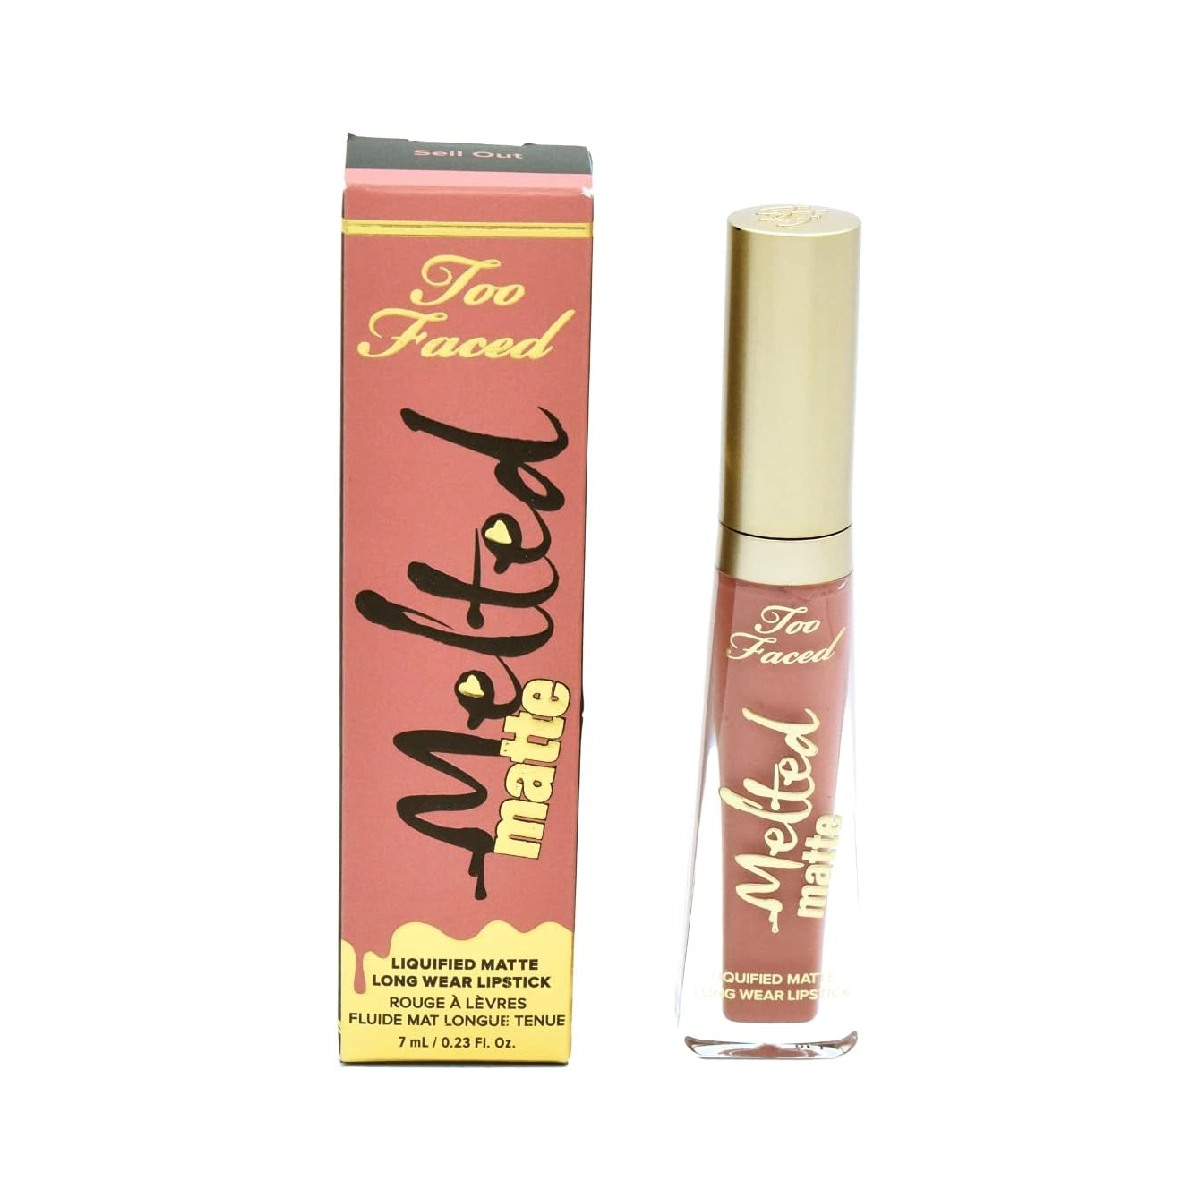 Too Faced Melted Matte Liquified Long Wear Lipstick - a lipstick tube on a white background